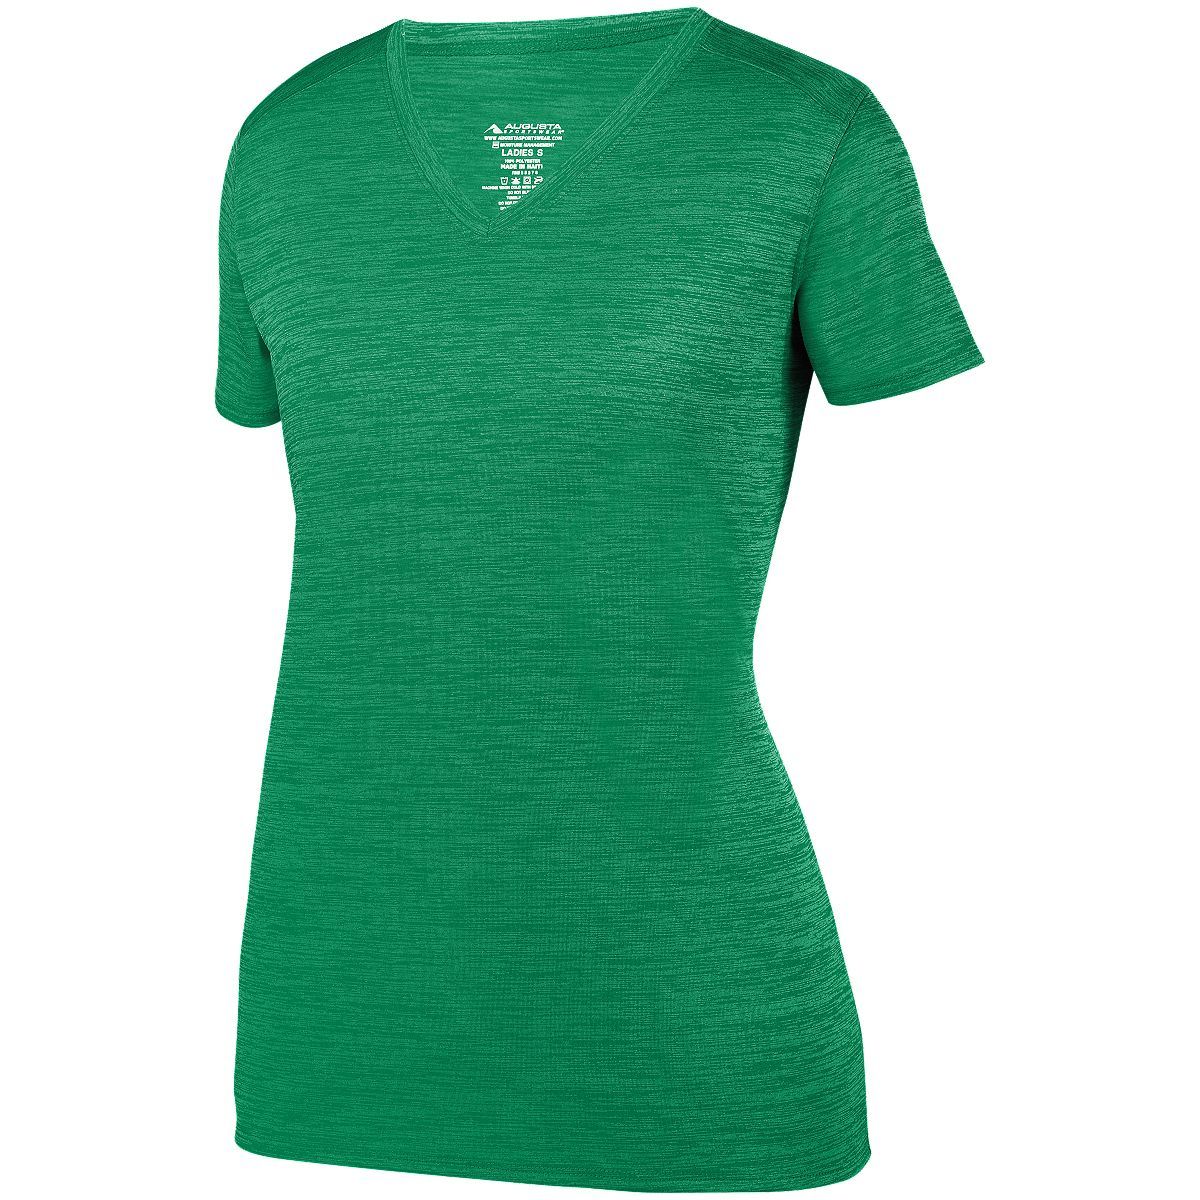 Augusta Sportswear Ladies Shadow Tonal Heather Training Tee in Kelly  -Part of the Ladies, Ladies-Tee-Shirt, T-Shirts, Augusta-Products, Shirts, Tonal-Fleece-Collection product lines at KanaleyCreations.com